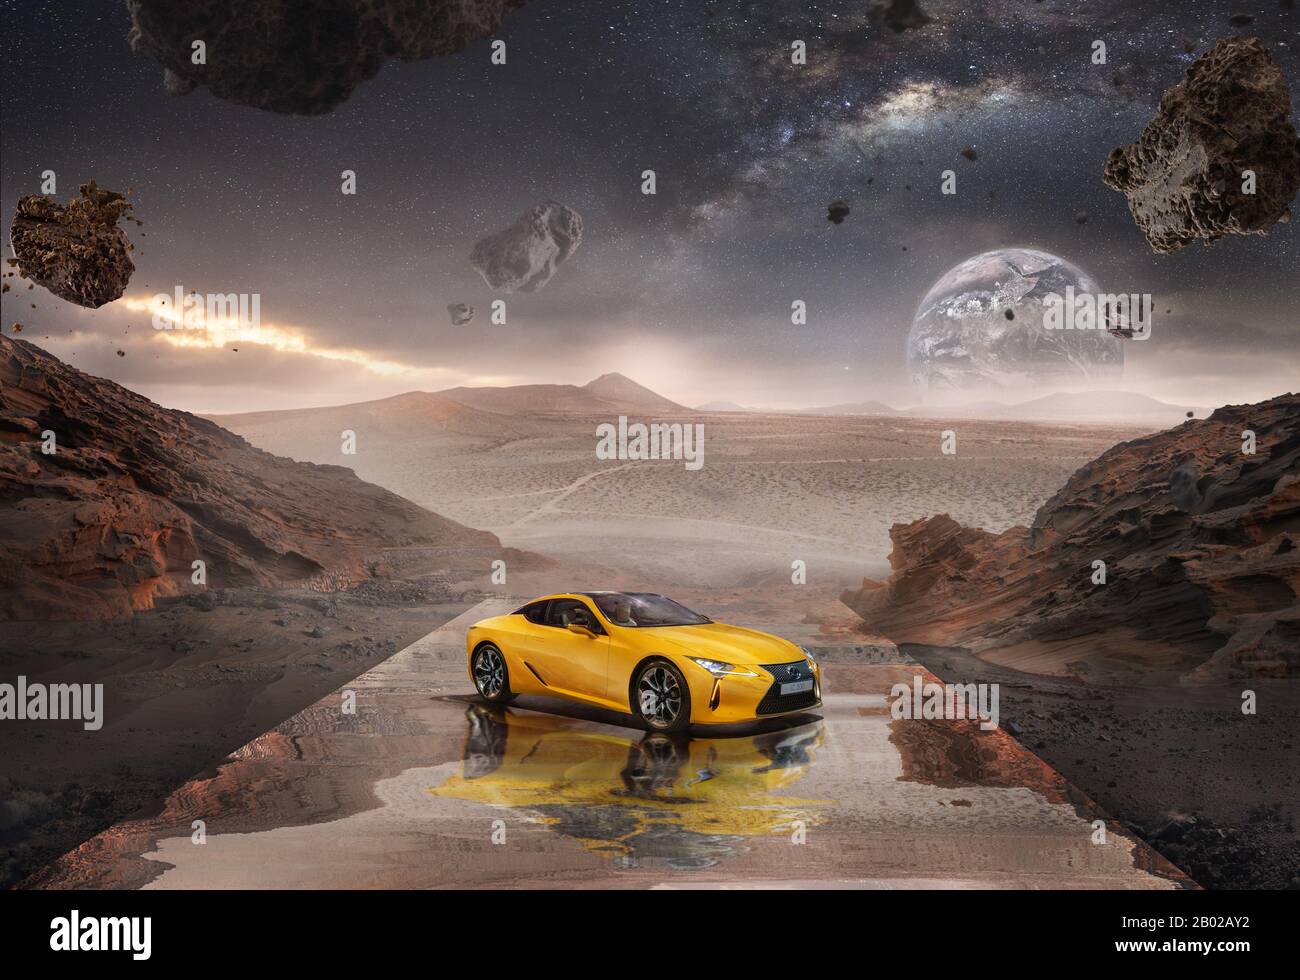 Lexus on Mars - unstoppable car for your intergalactic travel. Yellow car landed on another planet, surrounded by stars, water, asteroids and stardust. View of Earth on background. Modern tech concept. Stock Photo